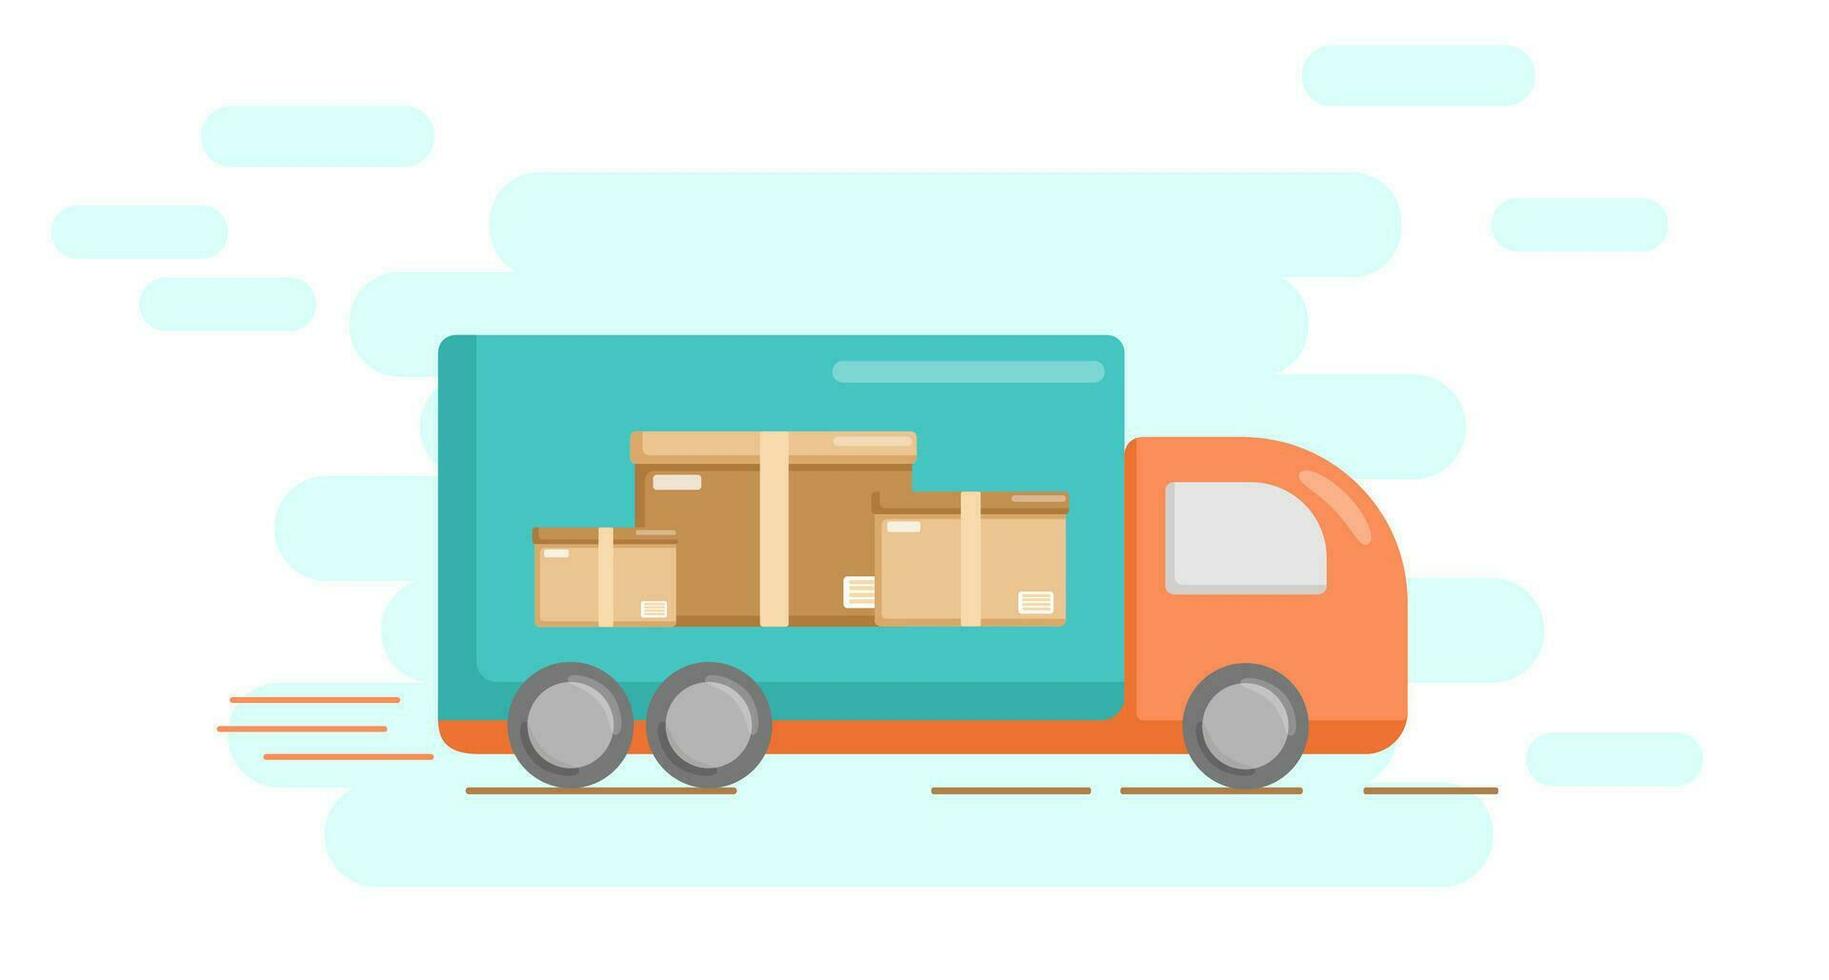 A truck carrying boxes vector